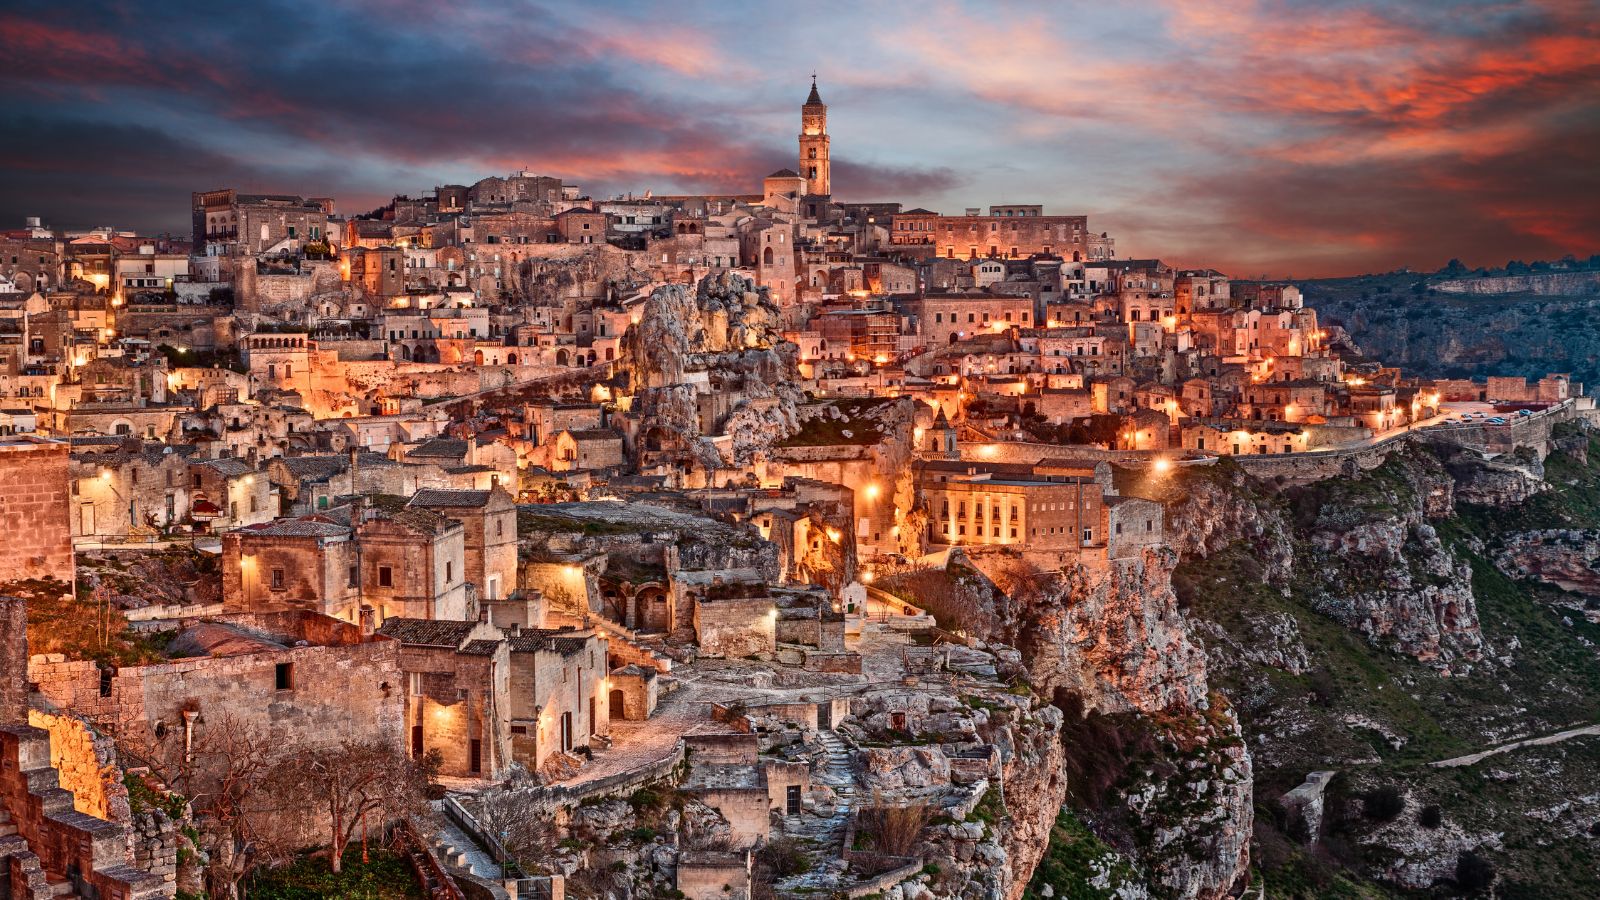 <p>The ancient caves in Sassi di Matera became a UNESCO World Heritage Site in <a href="https://www.italia.it/en/basilicata/matera/things-to-do/matera-the-sassi">1993</a> and are well worth a visit if you head to Matera. You’ll also be able to learn about the city’s history and culture at the Casa Grotta, or Cave House, museum. Matera is full of unique landscapes and architecture with breathtaking viewpoints.</p>